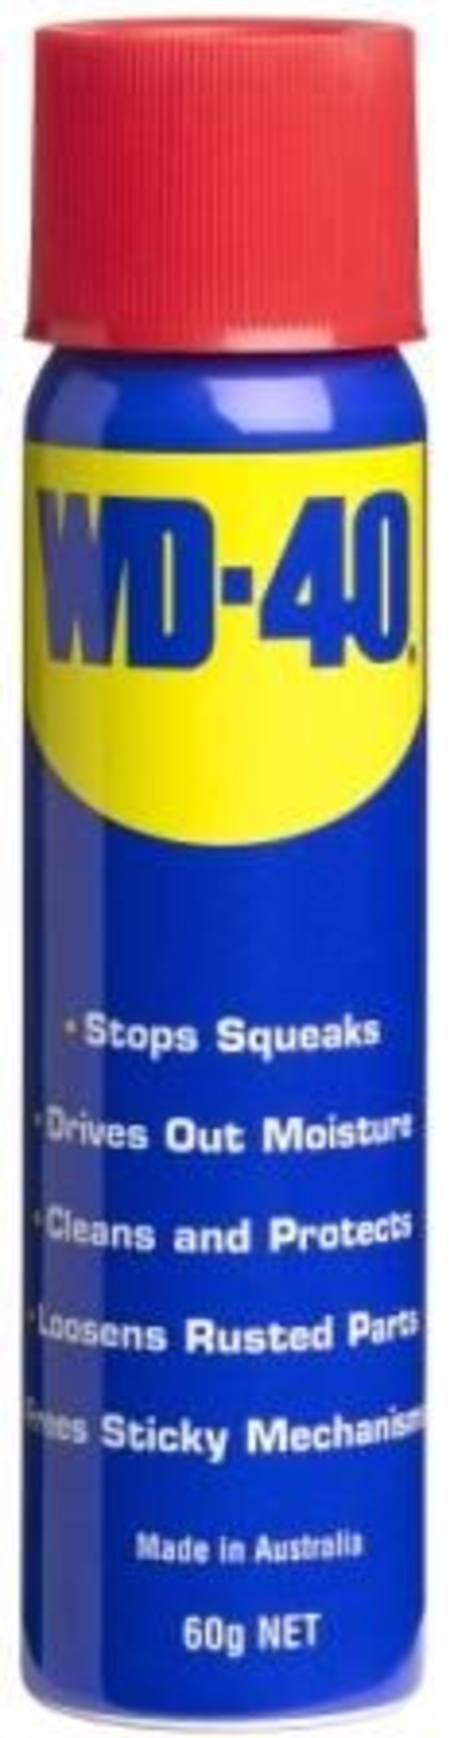 WD-40 LUBRICANT AND PENENTRANT 60g